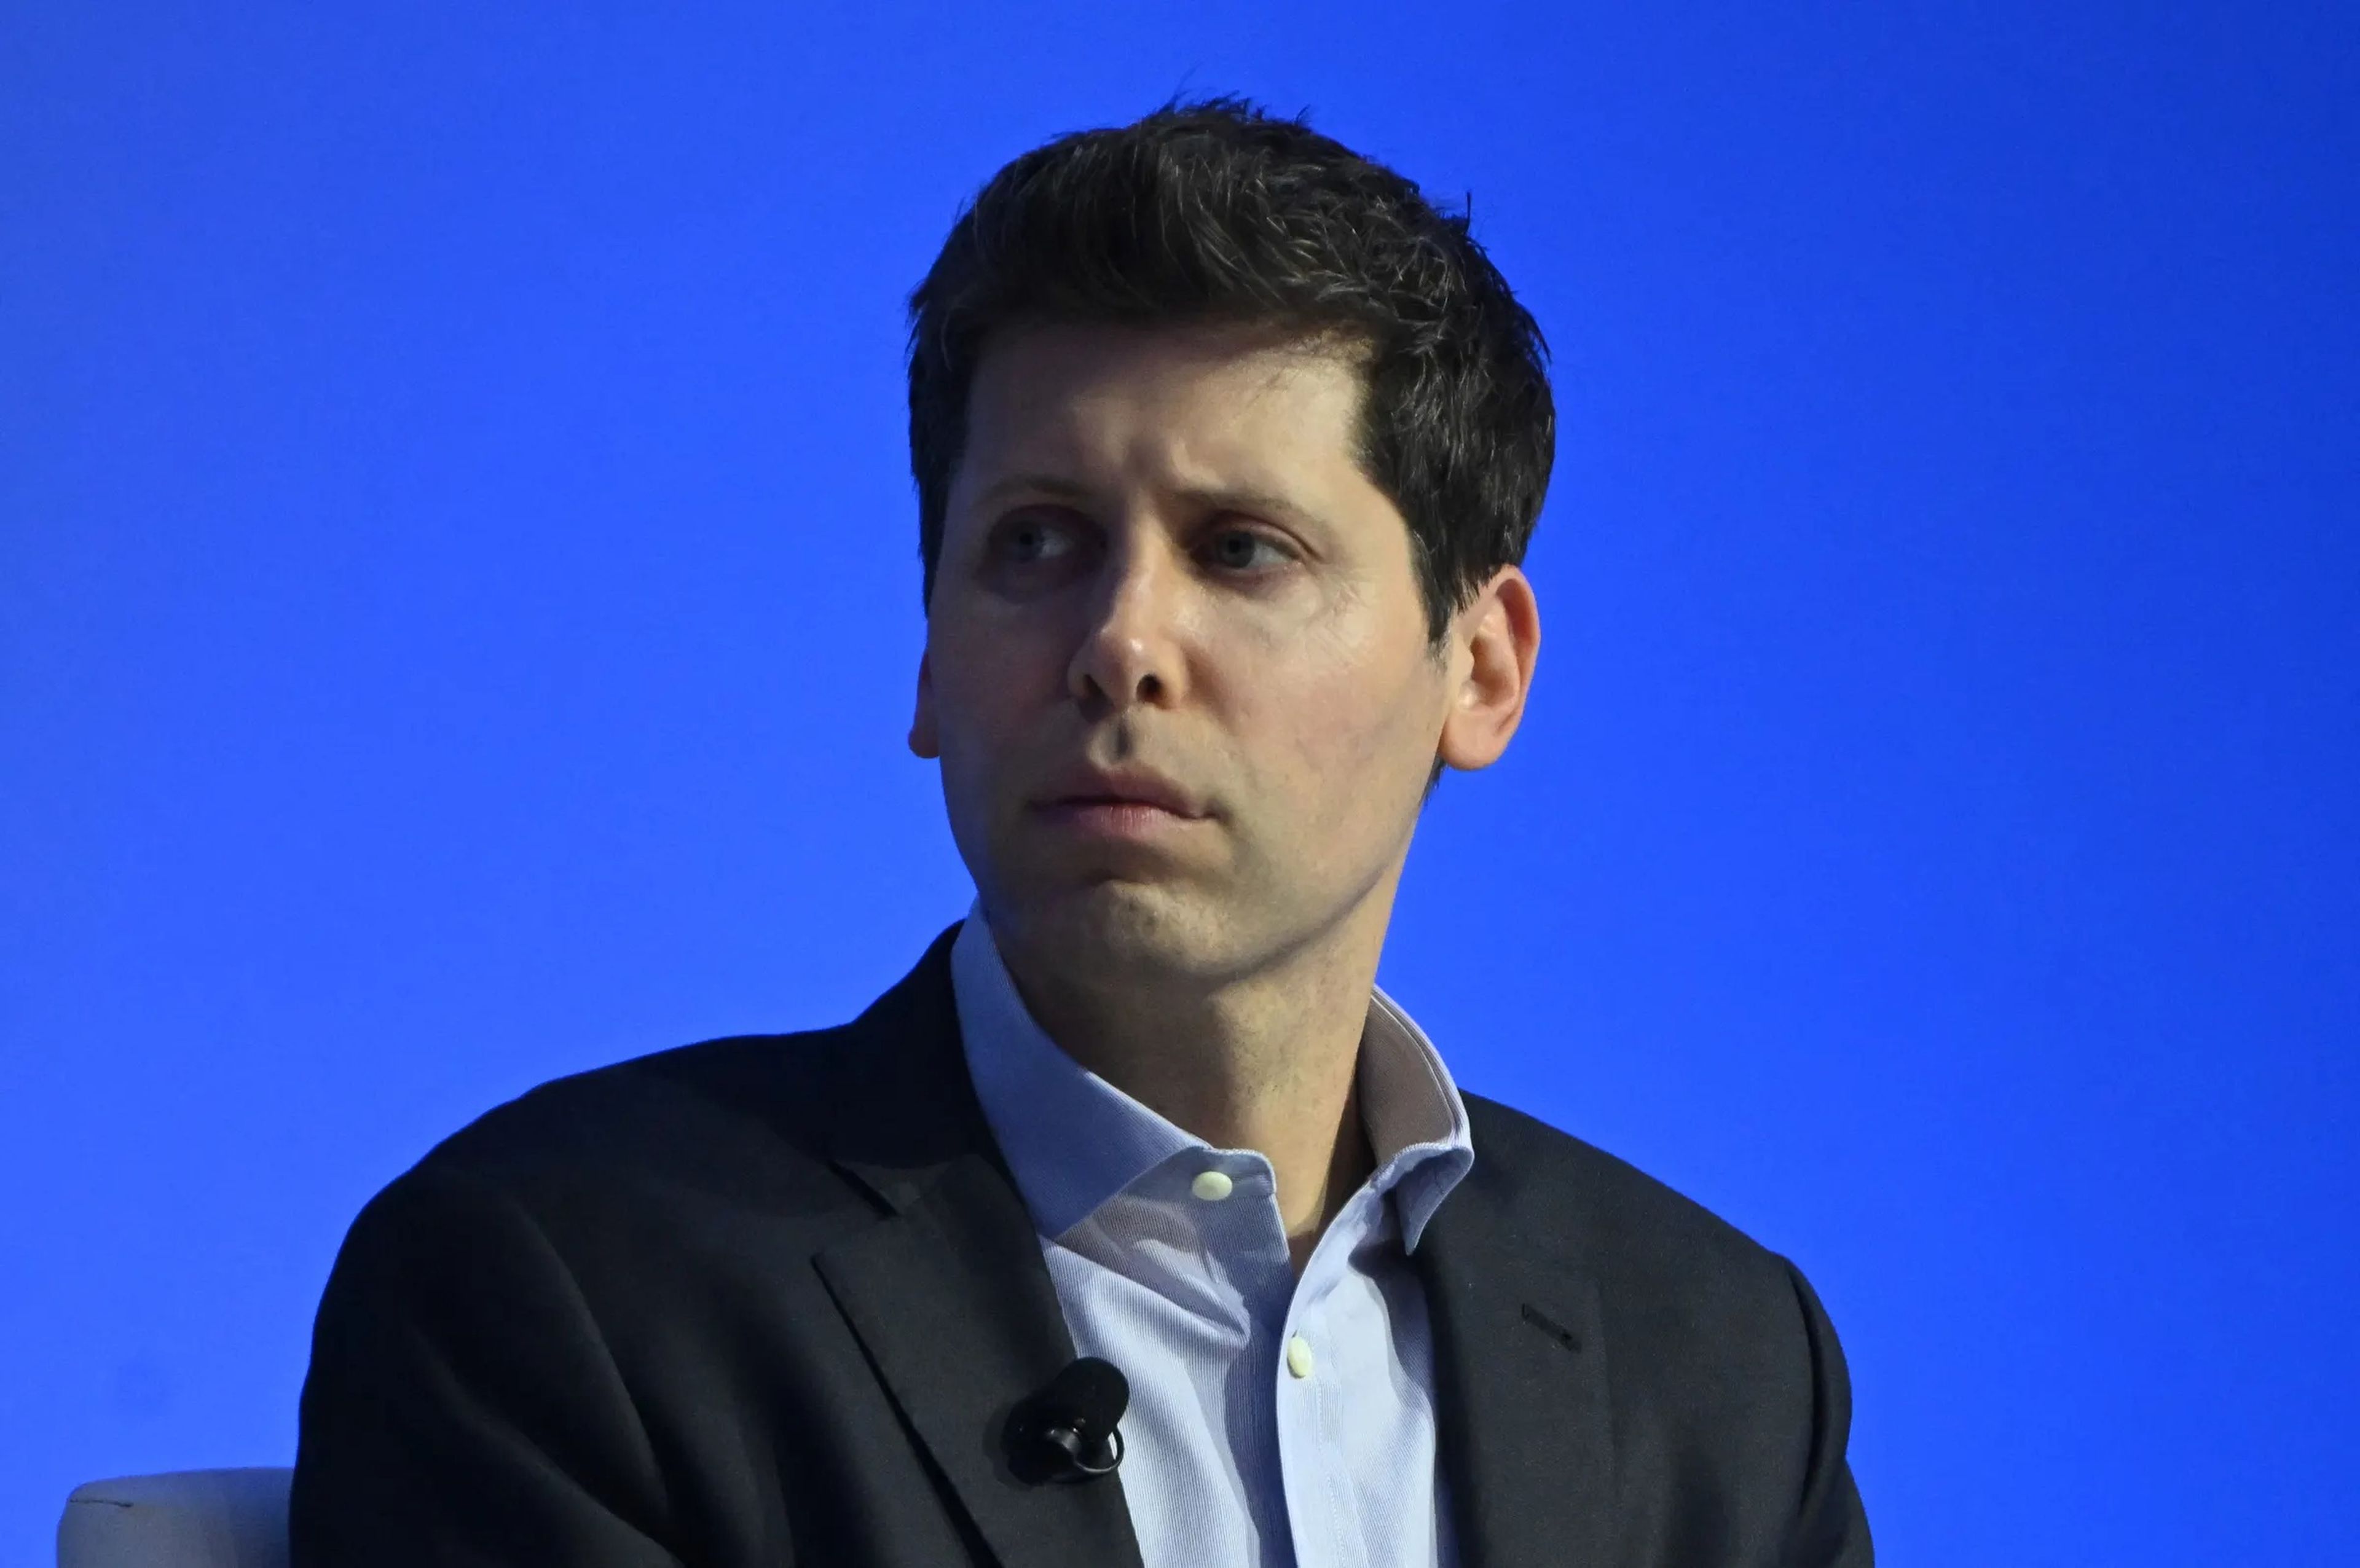 Sam Altman sits in front of a blue background, looking to the side.